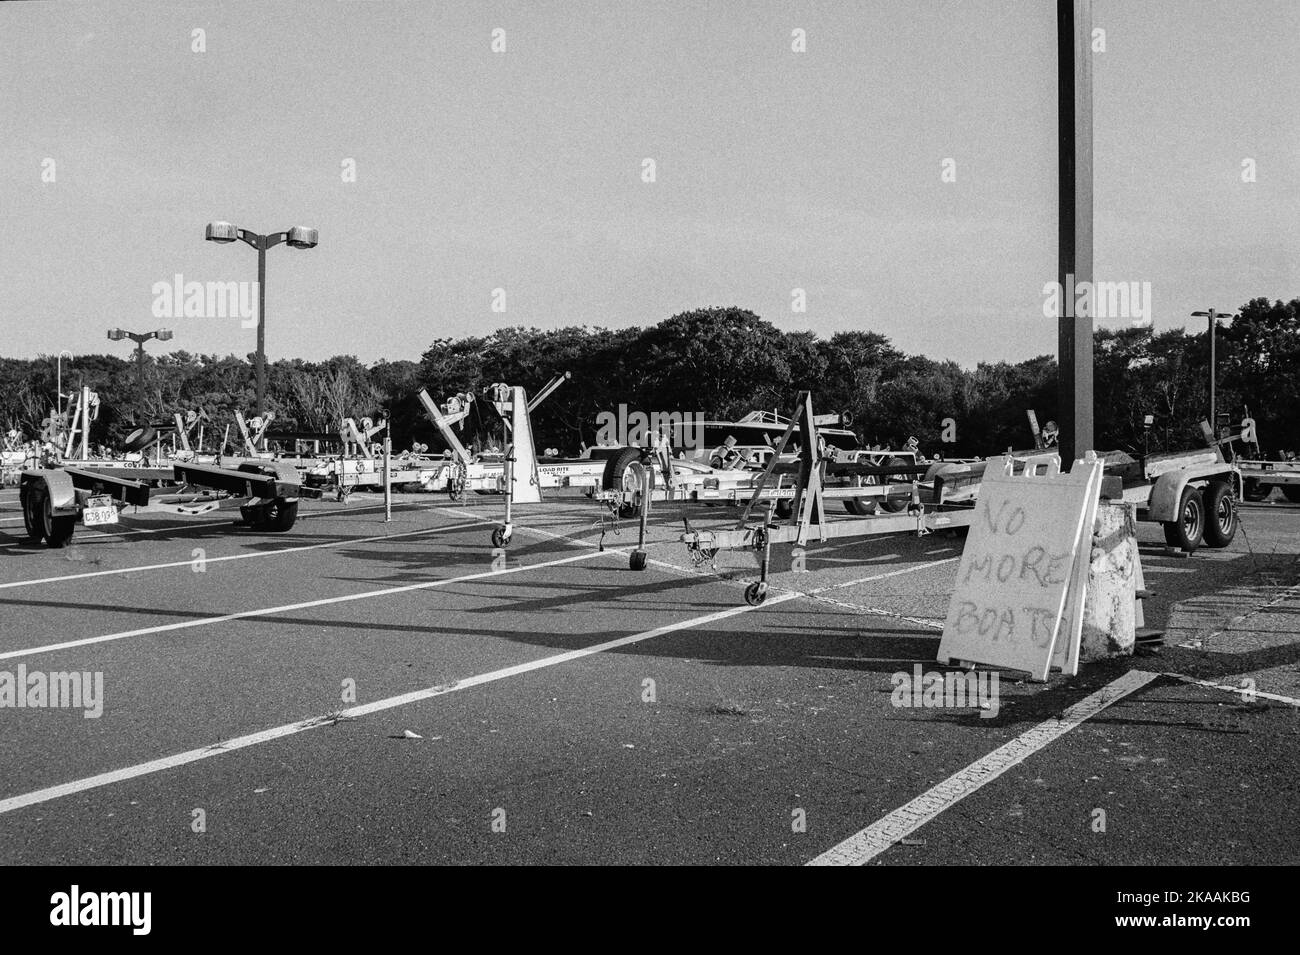 A sea of boat trailers in a parkinglot with a sign the reads No More Boats in Rockport, Massachusetts. The image was captured on analog black-and-whit Stock Photo